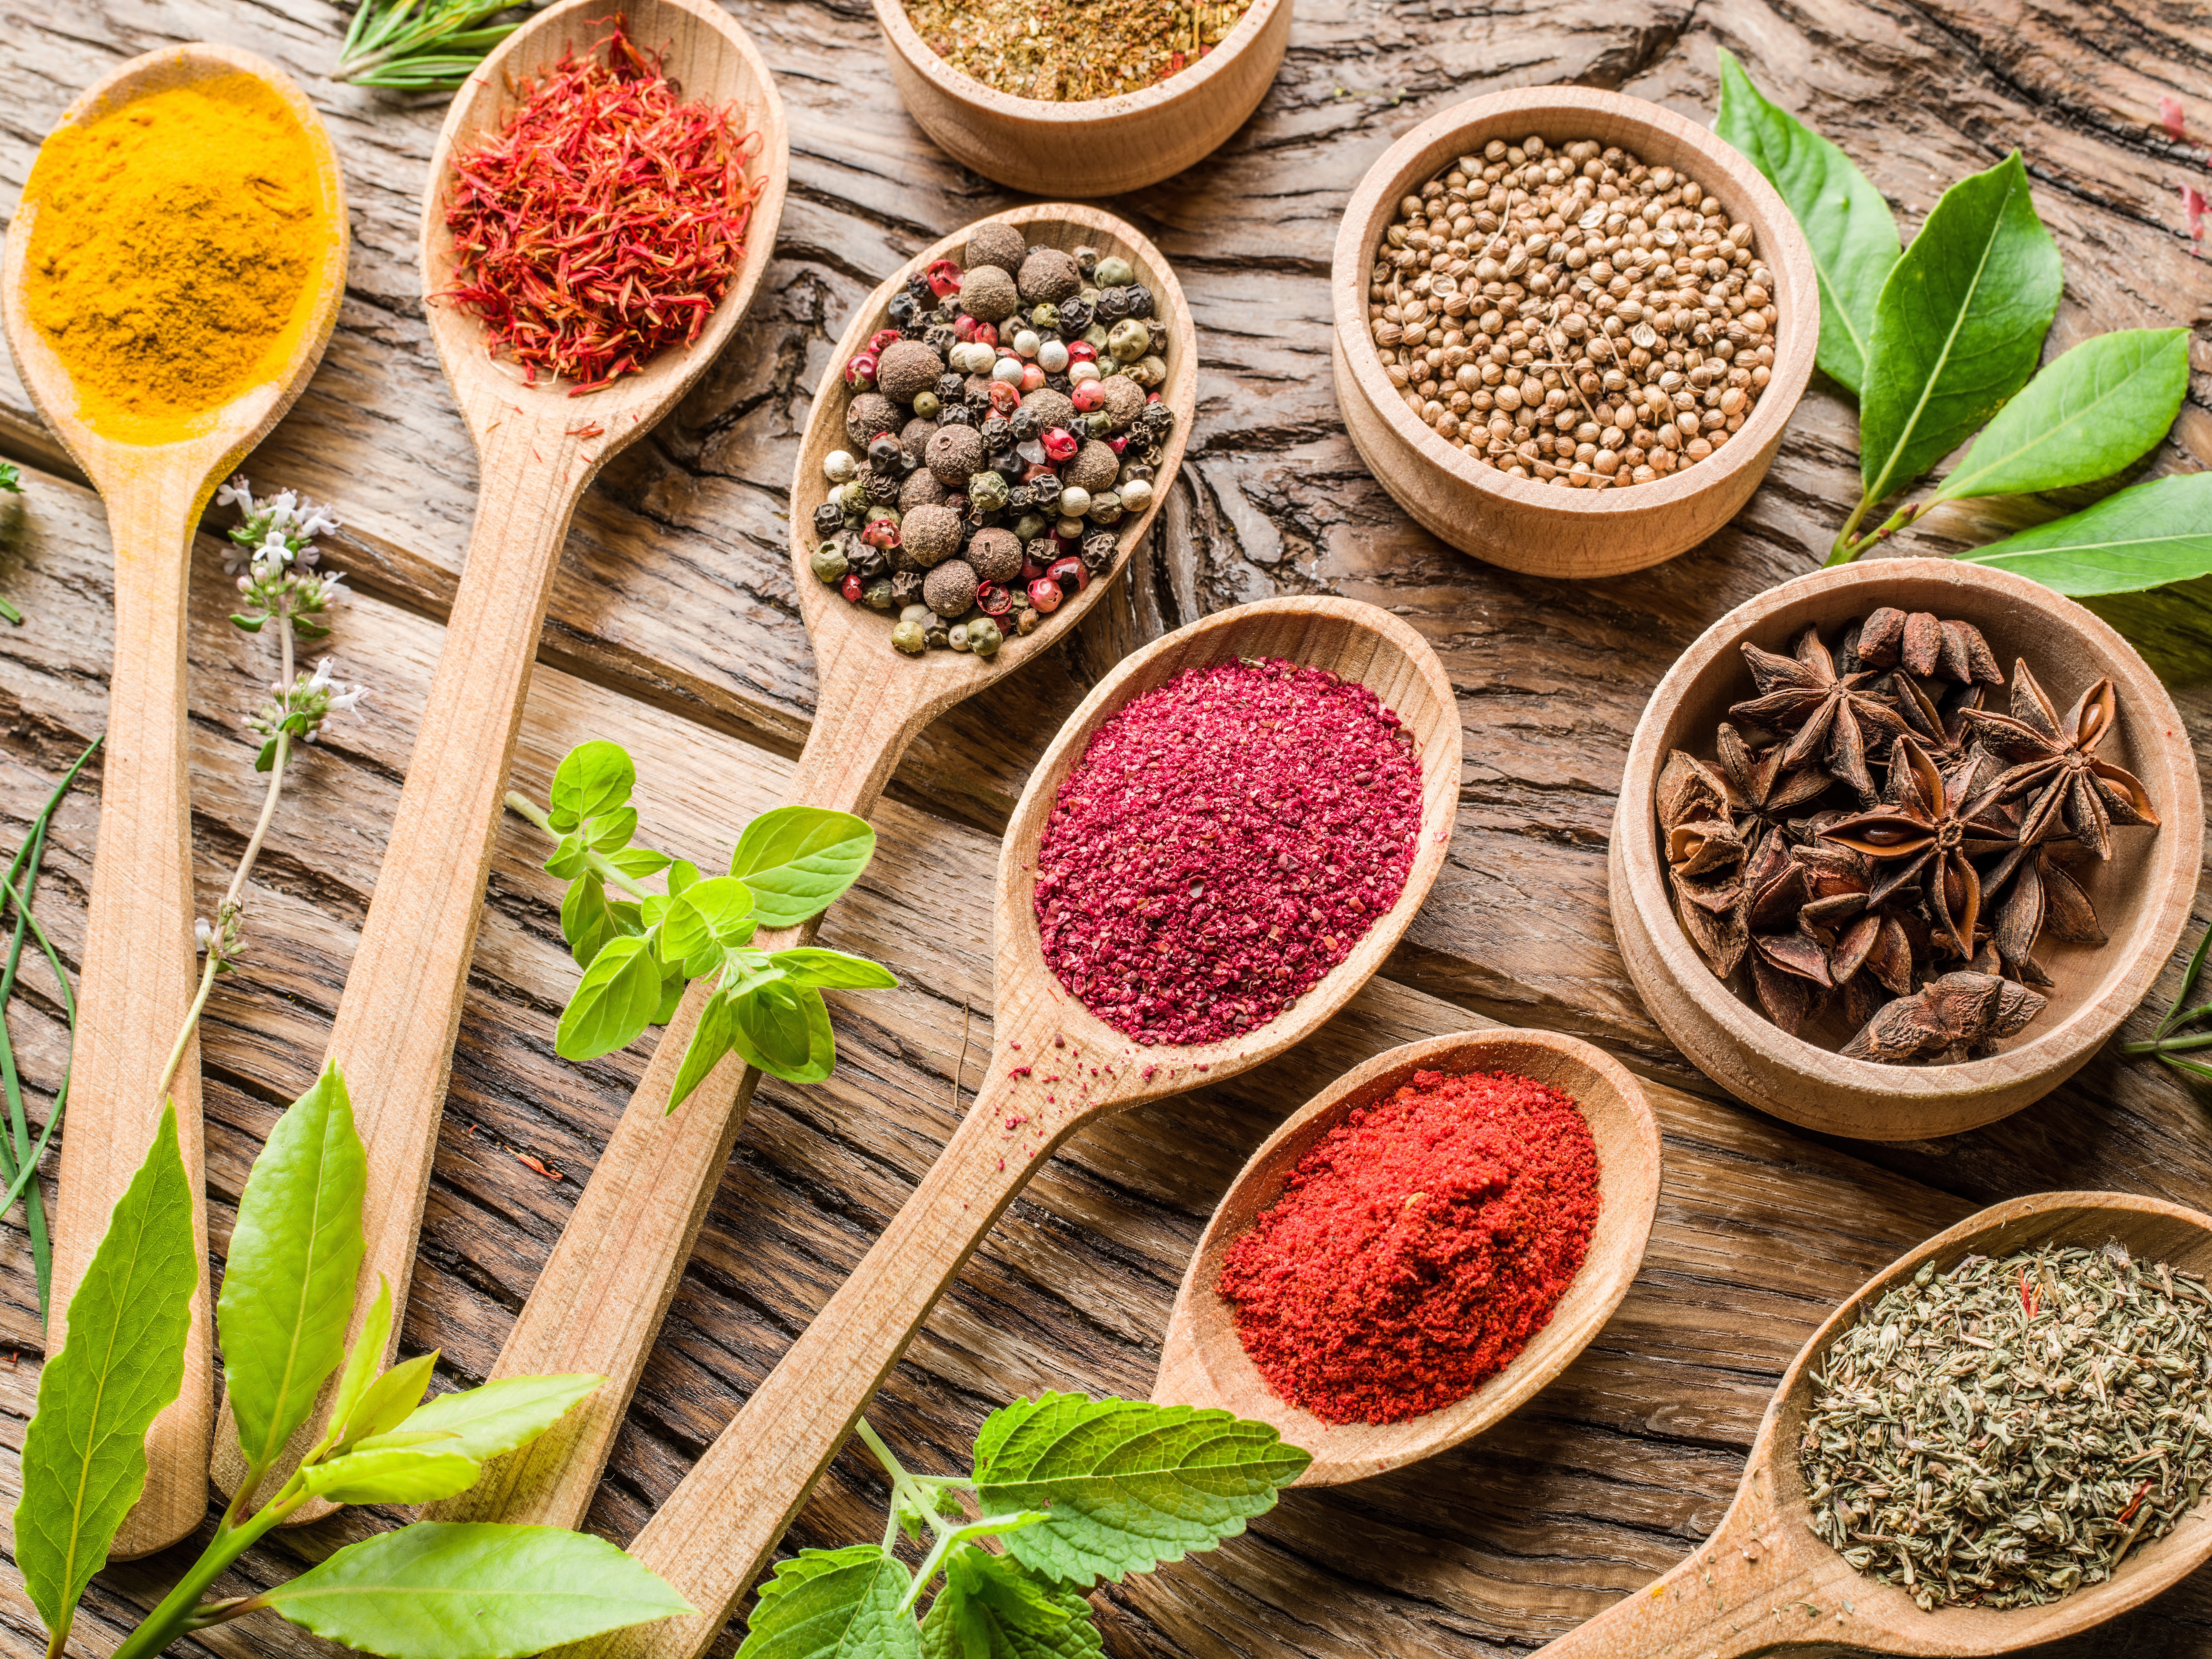 Herbs and Spices 8k Ultra HD Wallpaper | Background Image ...